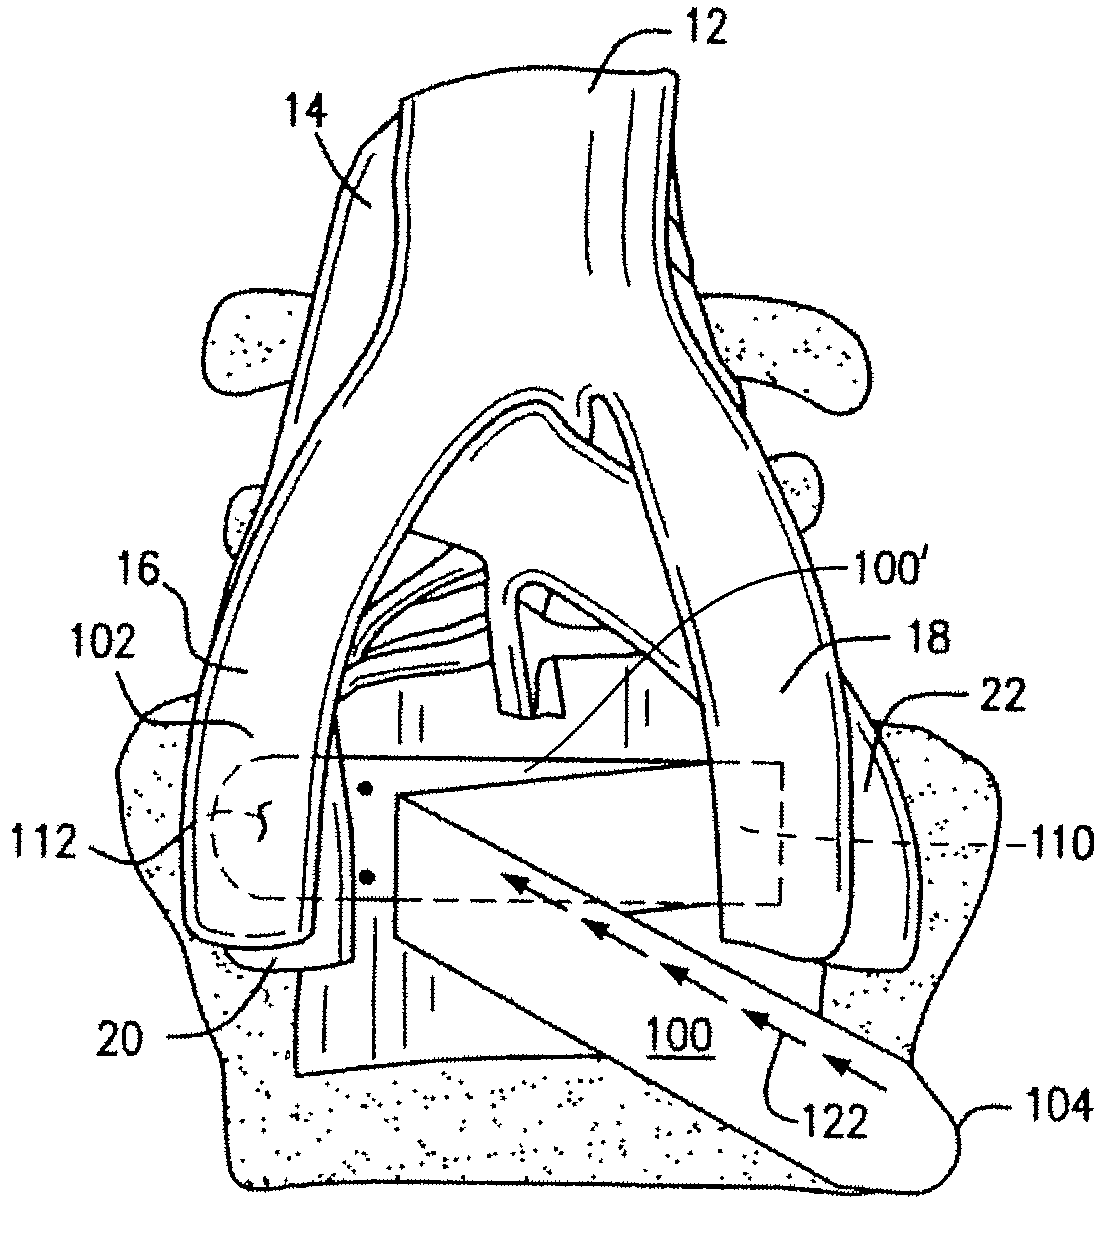 Methods and apparatus for vascular protection in spinal surgery